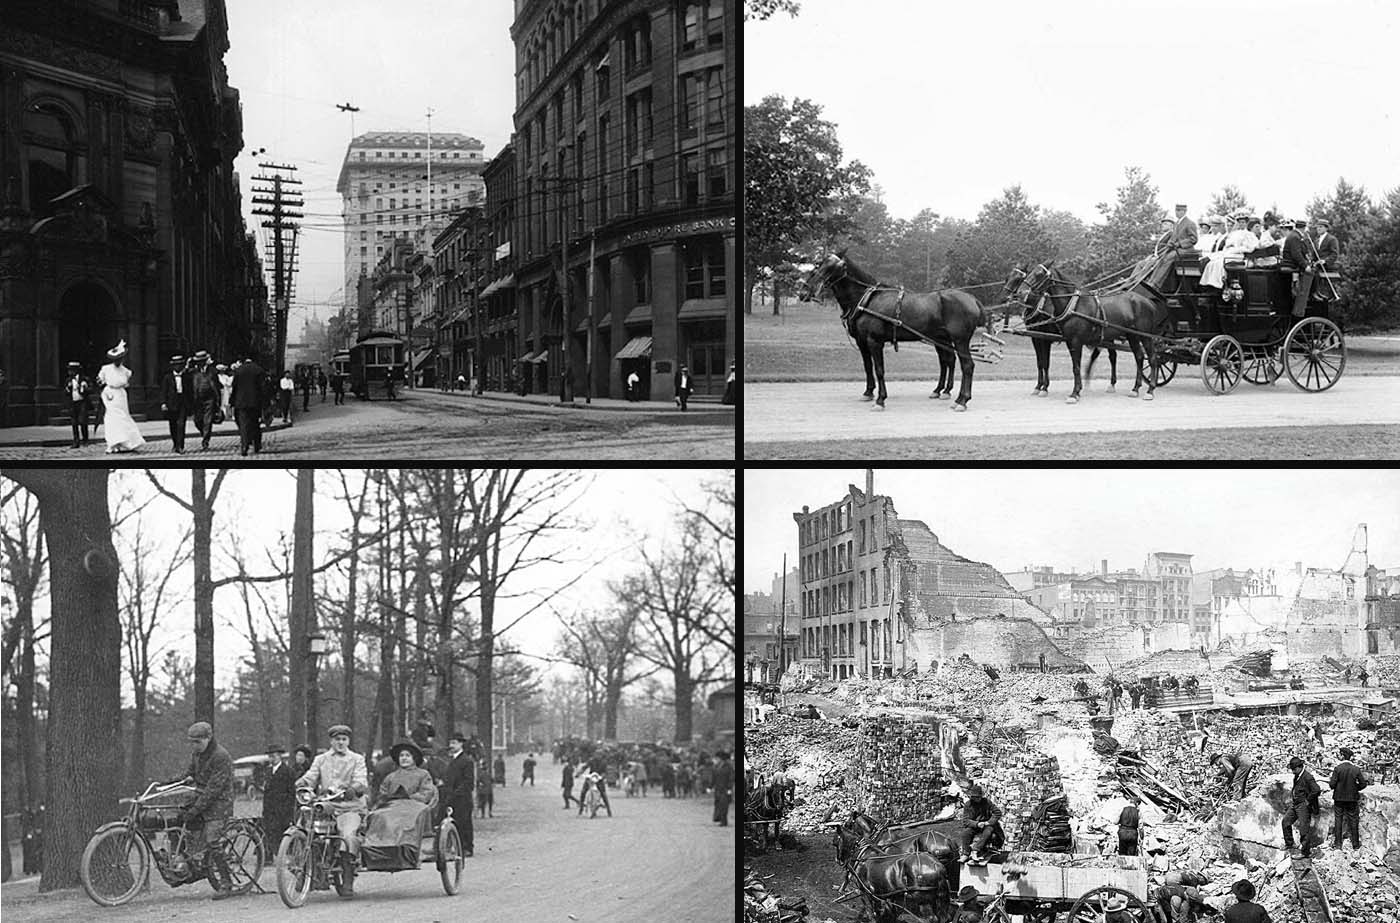 Vintage Photos That Show What Toronto Looked Like in the 1900s